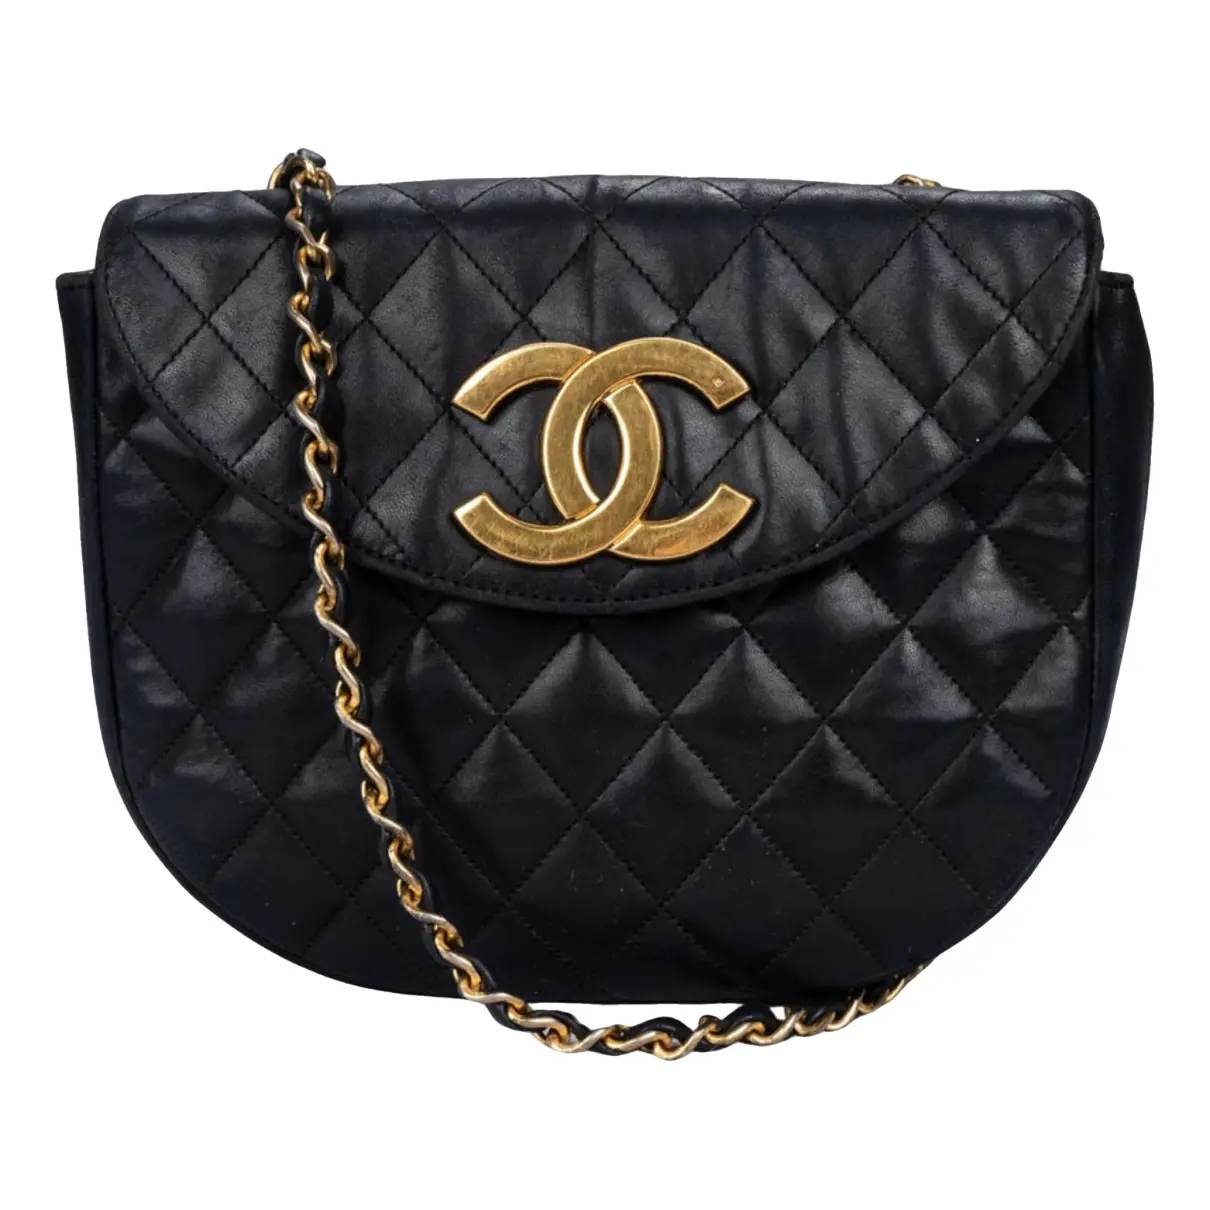 Chanel brown quilted lambskin crossbody bag at Jill's Consignment